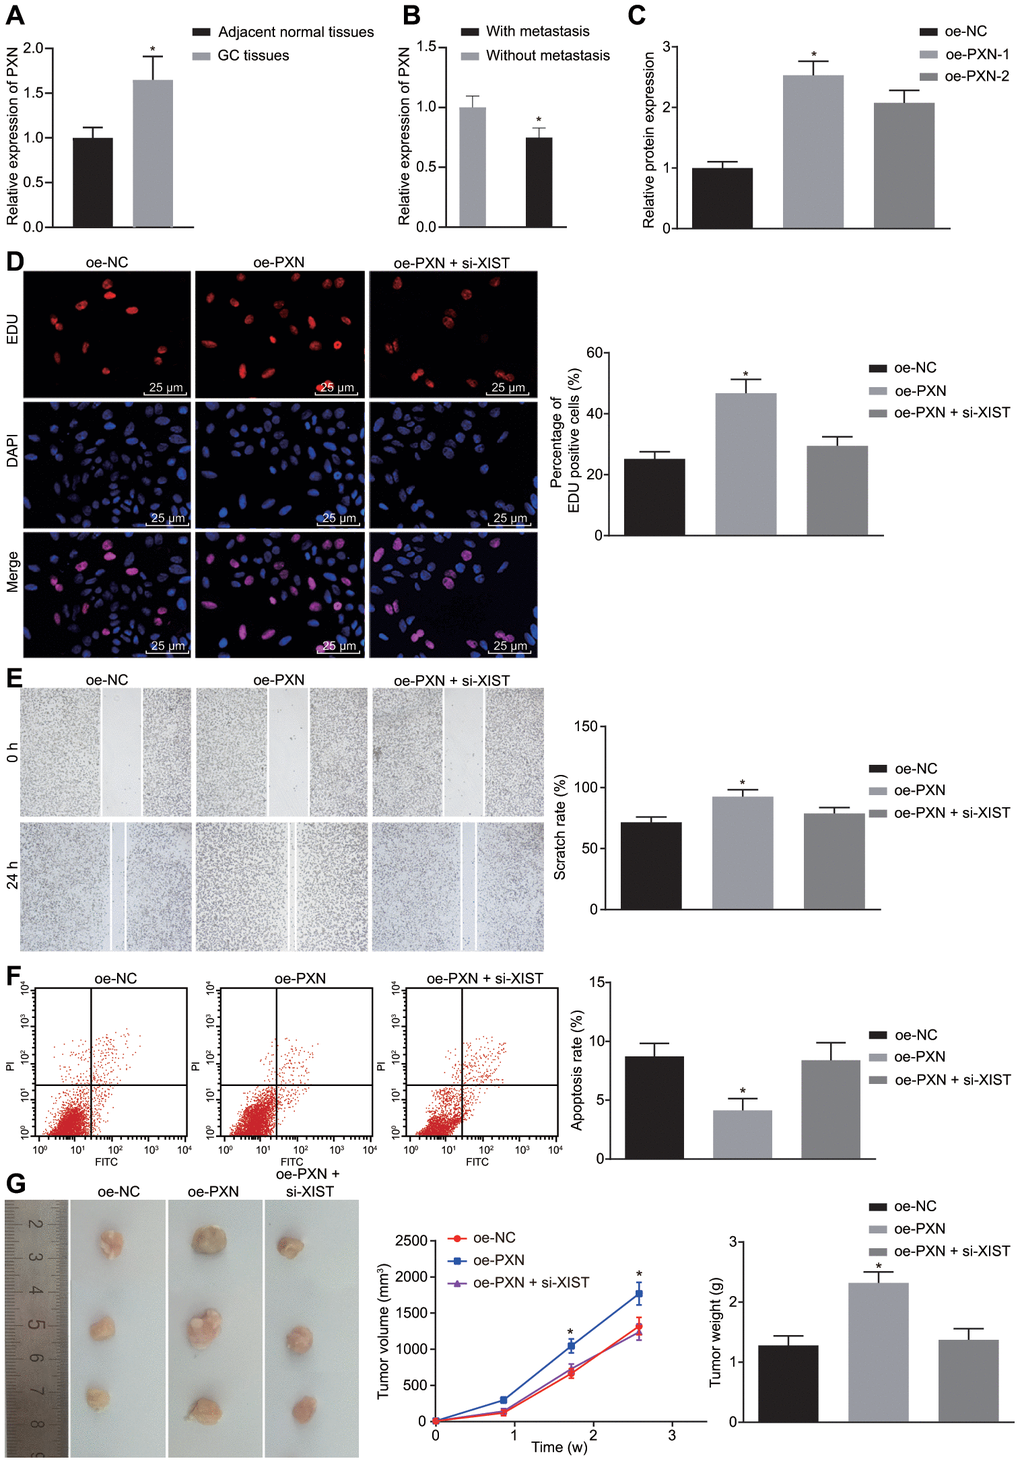 PXN enhances tumor formation ability, cell proliferation and metastasis, but suppresses cell apoptosis in gastric cancer. (A) Relative expression of PXN in gastric cancer tissues (n = 65) and the adjacent normal tissues determined by RT-qPCR; *, p B) Relative expression of PXN in gastric cancer tissues from patients with metastasis (n = 45) and without metastasis (n = 20) determined by RT-qPCR; *, p C–F), SGC7901 cells were transfected with oe-PXN or co-transfected with oe-PXN and si-XIST. (C) The mRNA expression of PXN detected by RT-qPCR; (D) Cell proliferation ability in each group detected by EdU assay (× 400); (E) Cell migration ability detected by scratch test (× 40); (F) Cell apoptosis ability detected by flow cytometry; (G) The effect of PXN and lncRNA XIST on tumor formation in nude mice injected with the stably transfected SGC7901 cells. All measurement data and statistical results were expressed as mean ± standard deviation. *, p 